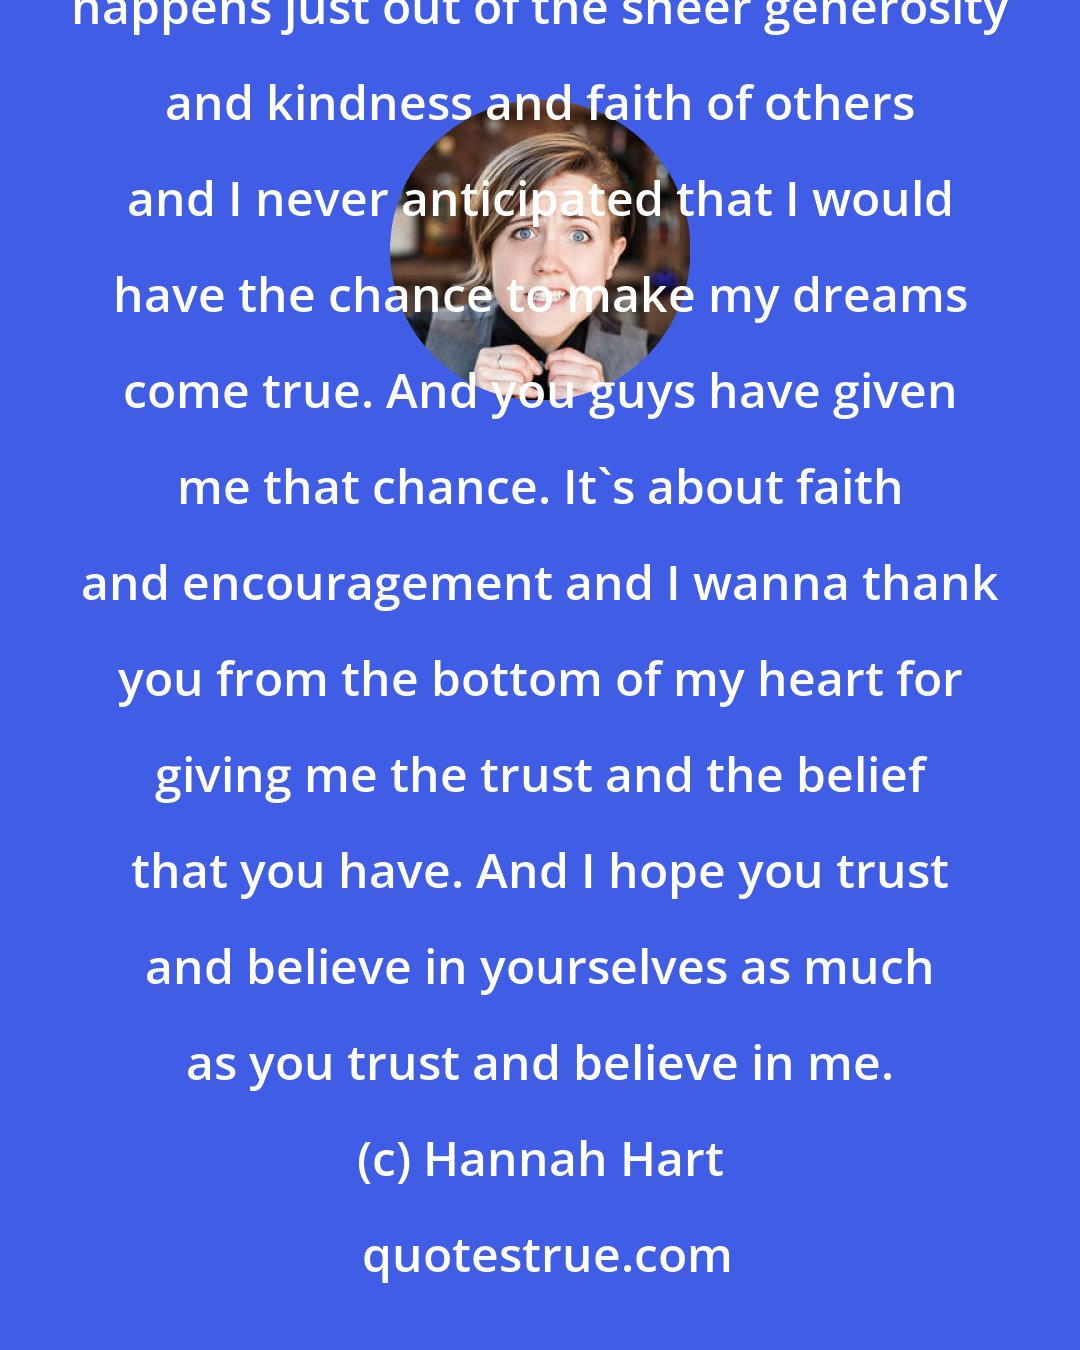 Hannah Hart: You really think your life is going to go a certain way sometimes, and then sometimes something amazing happens just out of the sheer generosity and kindness and faith of others and I never anticipated that I would have the chance to make my dreams come true. And you guys have given me that chance. It's about faith and encouragement and I wanna thank you from the bottom of my heart for giving me the trust and the belief that you have. And I hope you trust and believe in yourselves as much as you trust and believe in me.